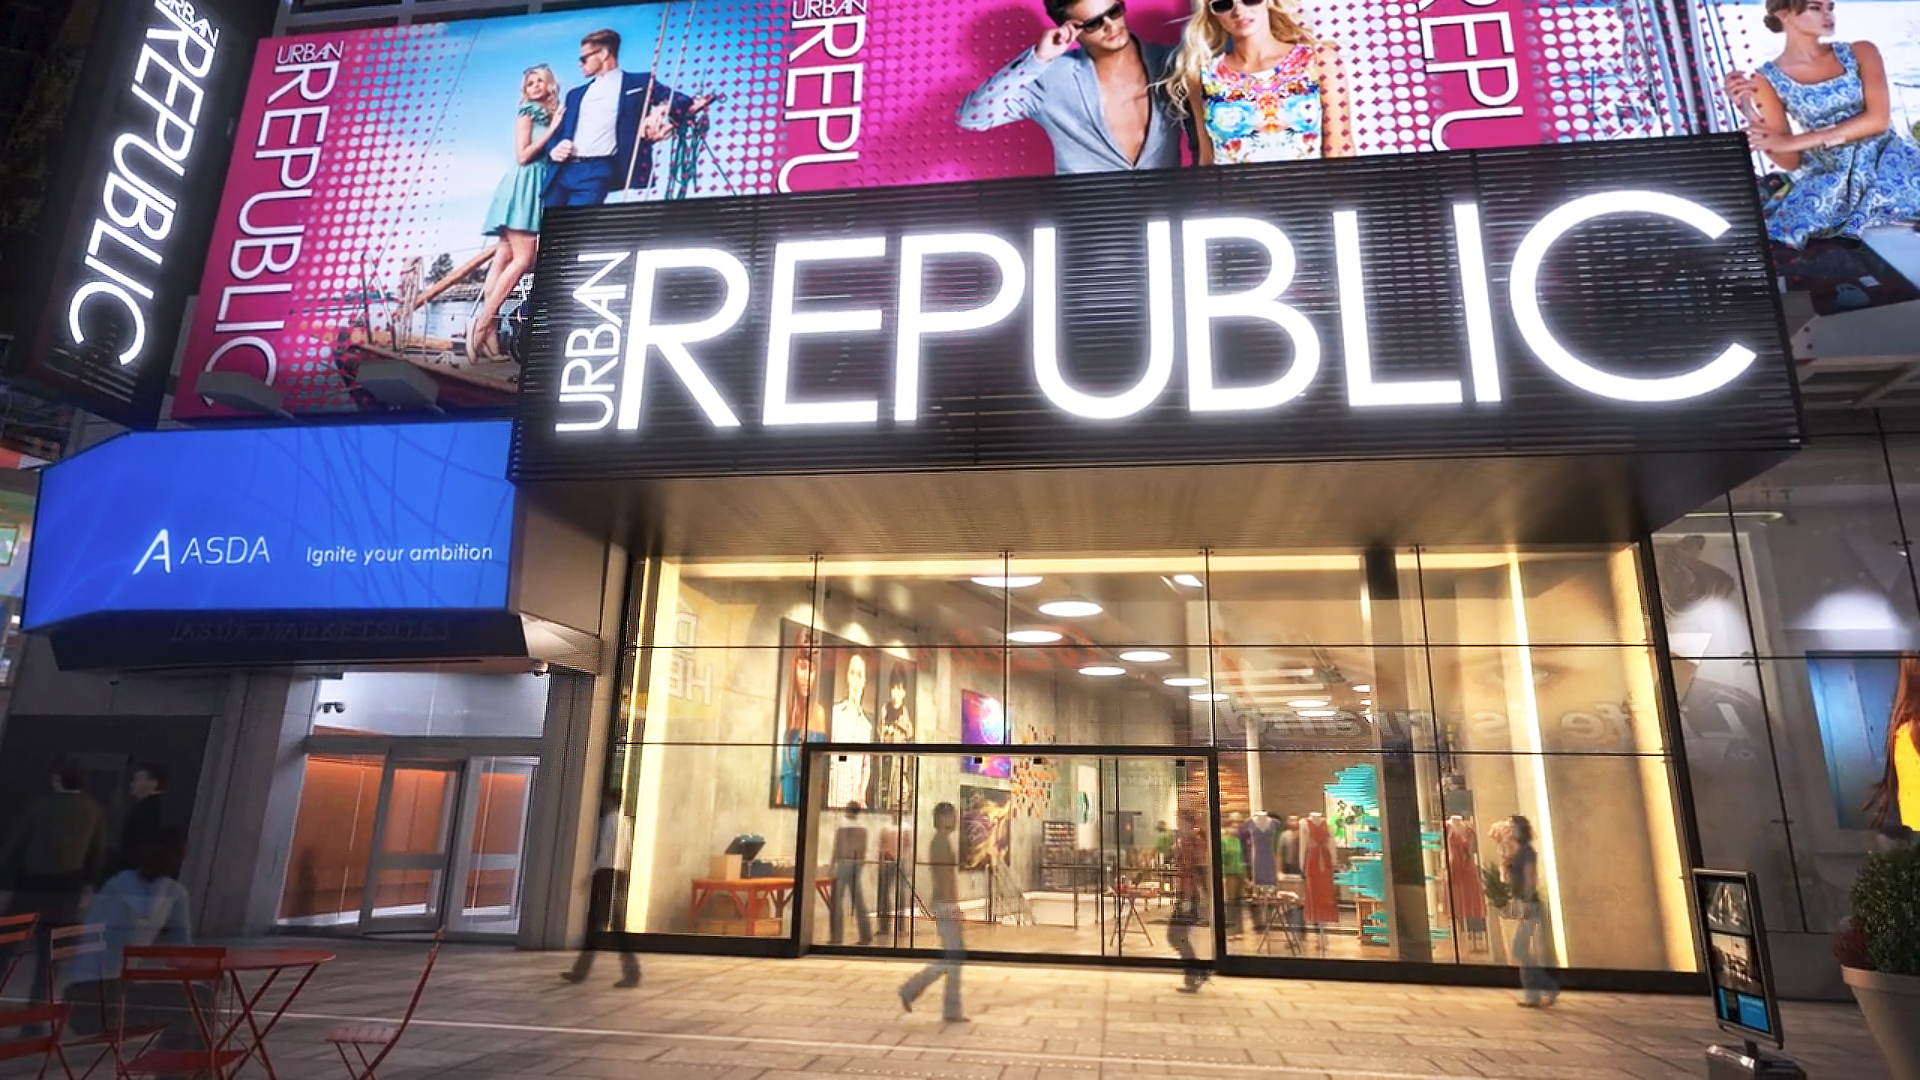 This 3D rendered image displays the entrance to the retail store, Urban Republic. The front of the store is glass, allowing the viewer to see in, and 3D modeled people are displayed walking in front of the store.